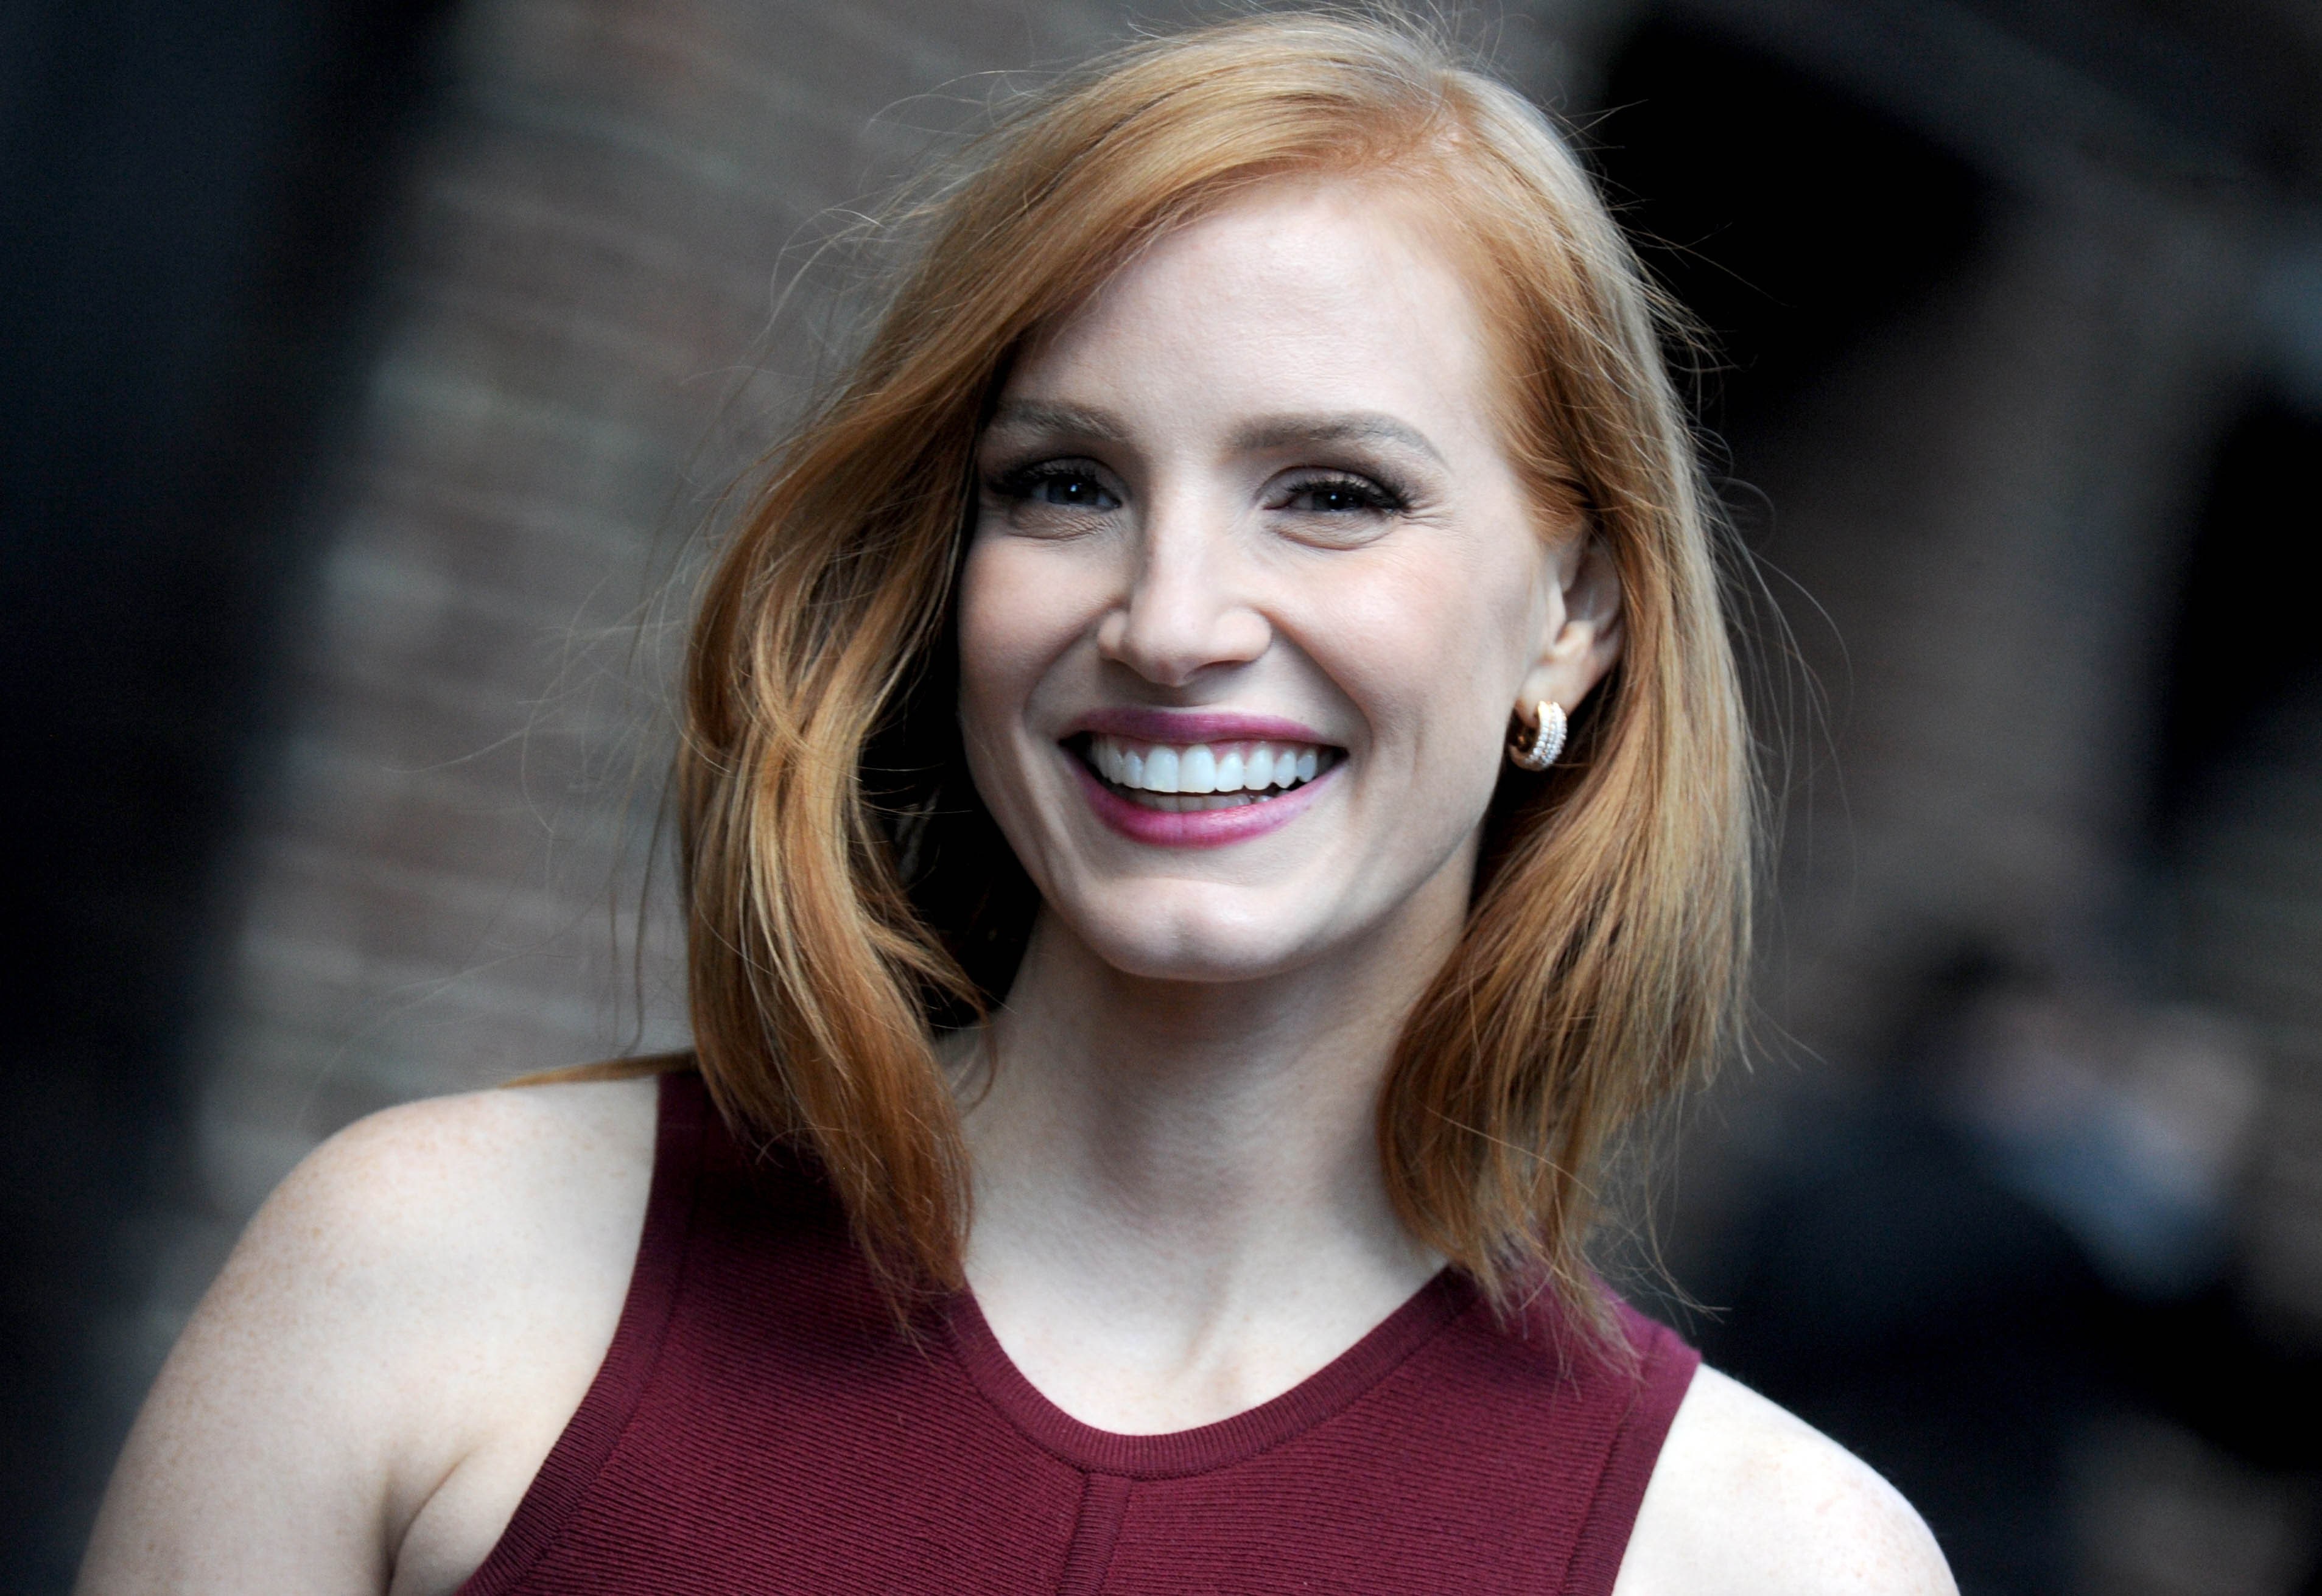 Jessica chastain hot photos